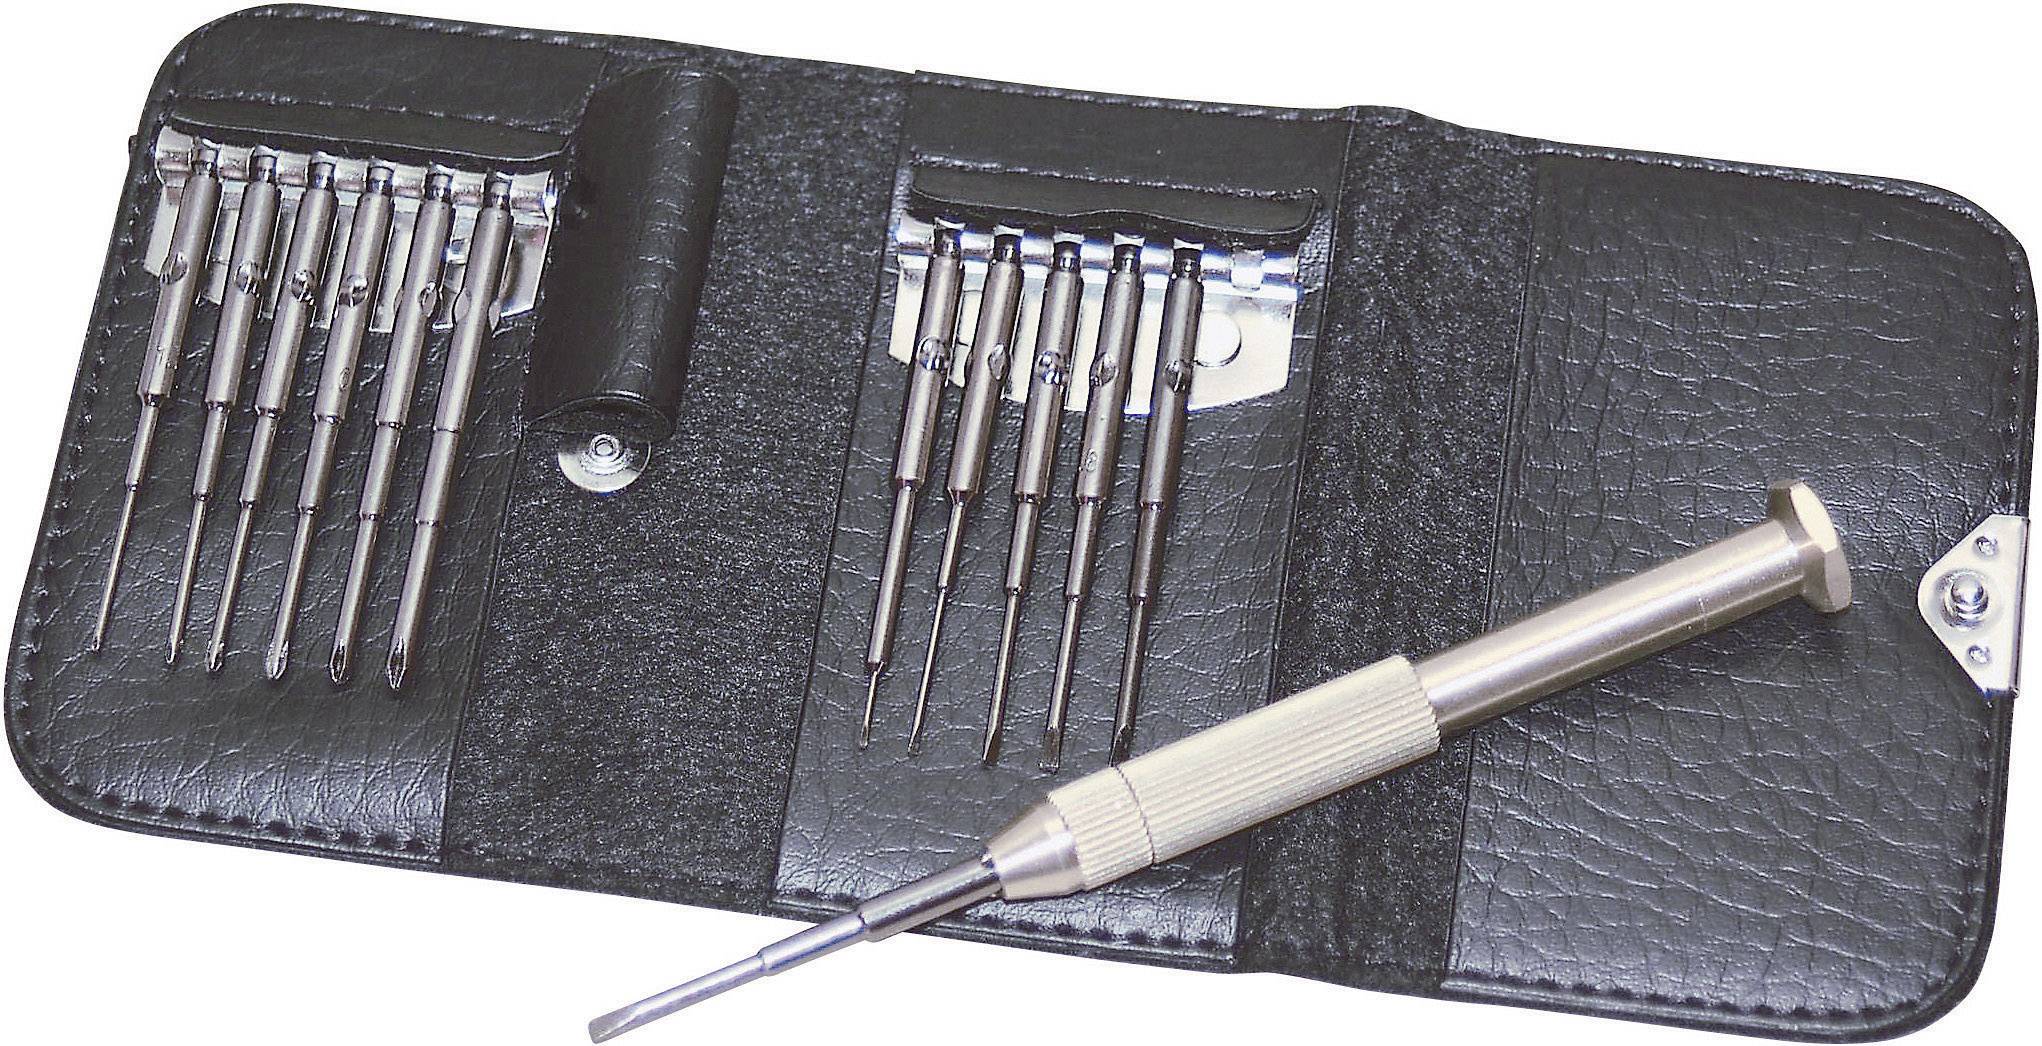 RONA Electrical  precision engineering Screwdriver set 13-piece Slot,  Phillips